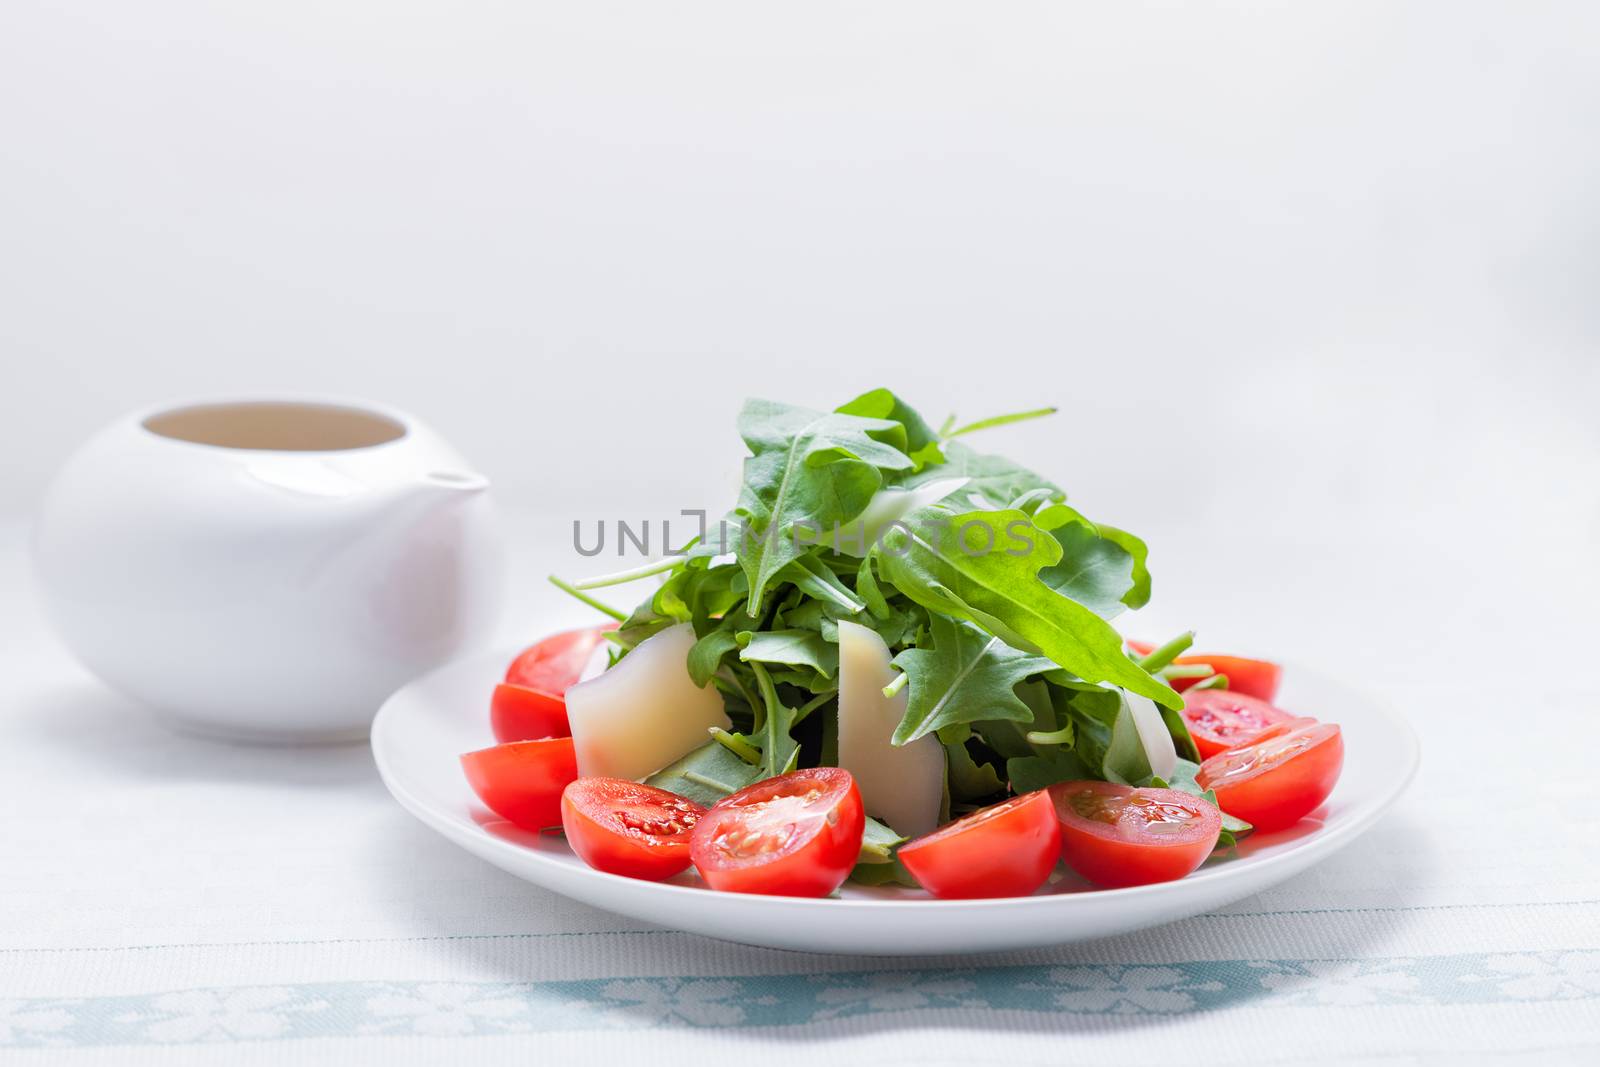 Salad with arugula, tomatoes by supercat67